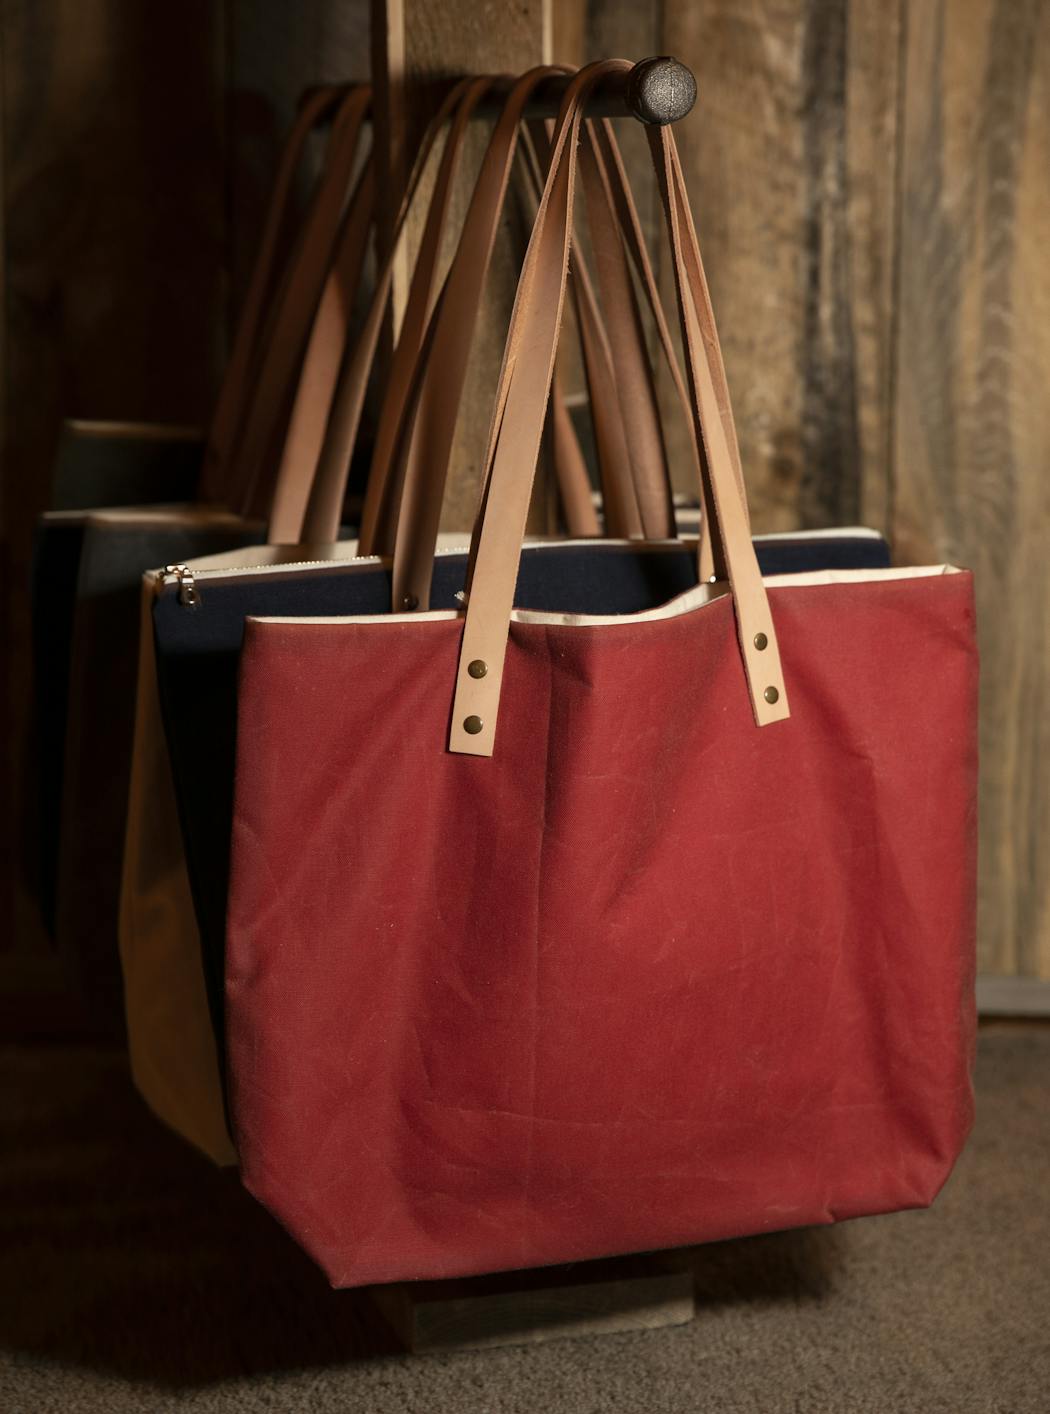 Pictured are the waxed canvas totes.